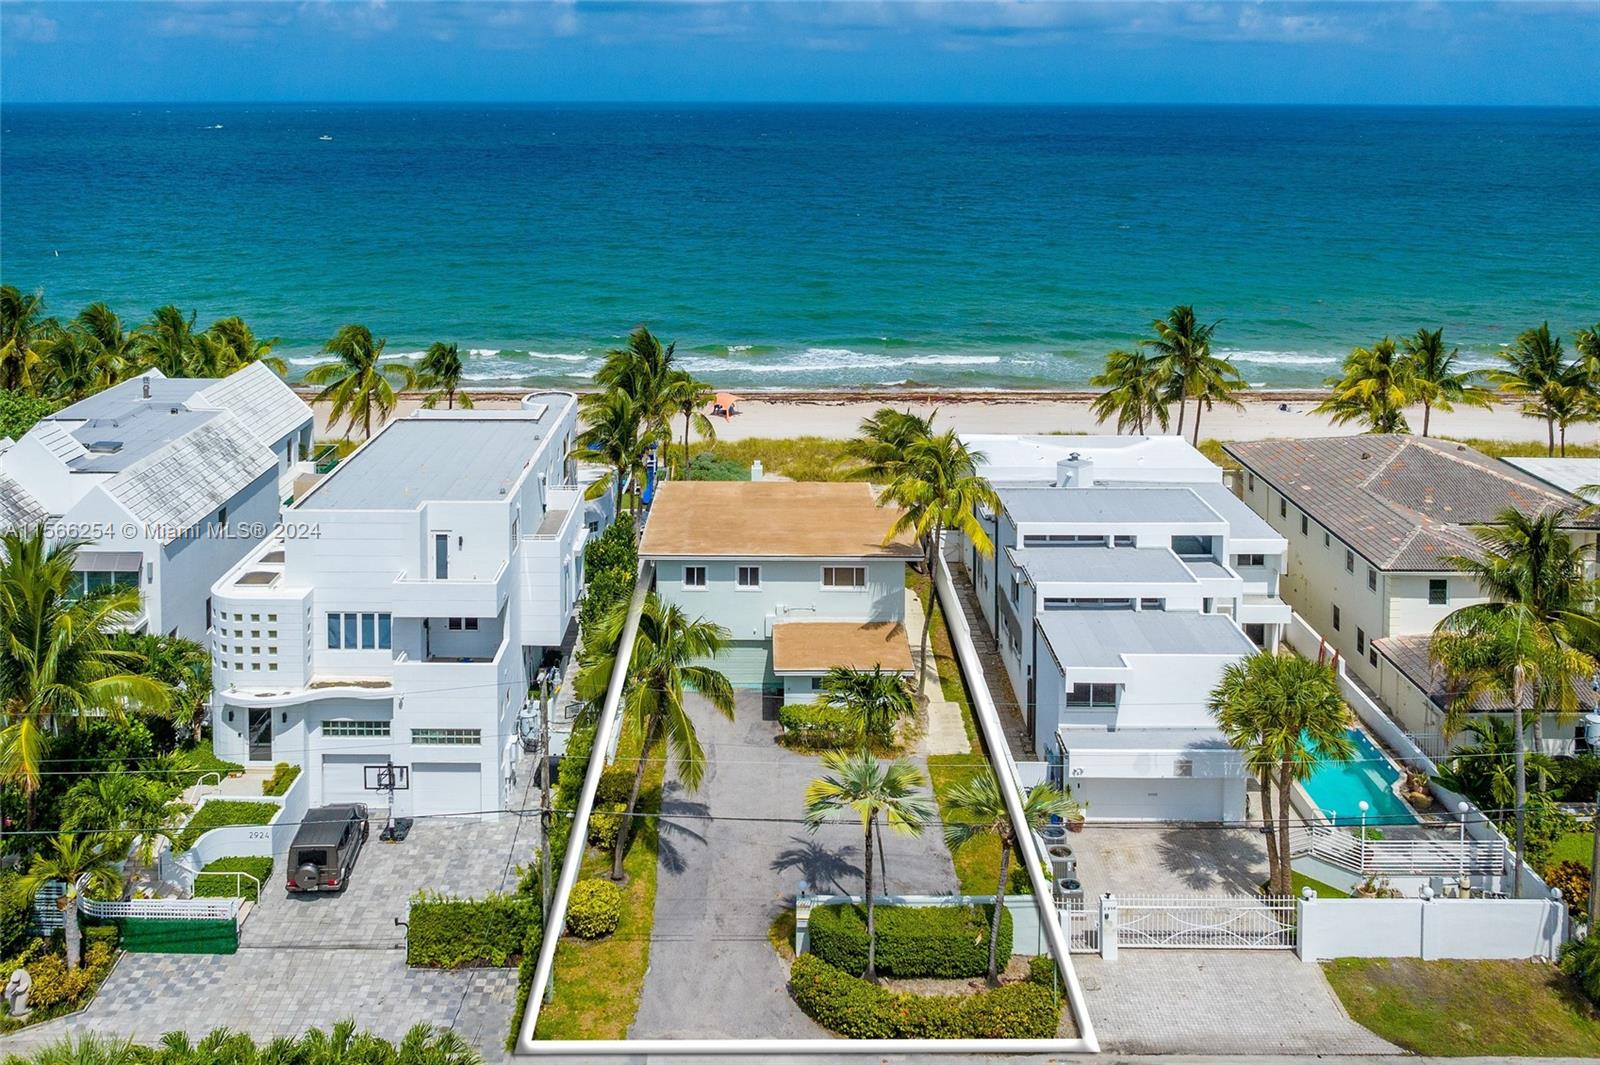 The opportunity you have been waiting for. Renovate your dream house with amazing views of the crystal blue Atlantic Ocean, and miles of award-winning white sand. Enjoy the beautiful weather and sunshine South Florida has to offer with 50 feet of ocean frontage and a total of .21 acres of land. Located in the private enclave of Lauderdale Beach, you are conveniently located just minutes from International airports, Fort Lauderdale's top restaurants, resorts, top country clubs, and exclusive yacht clubs.